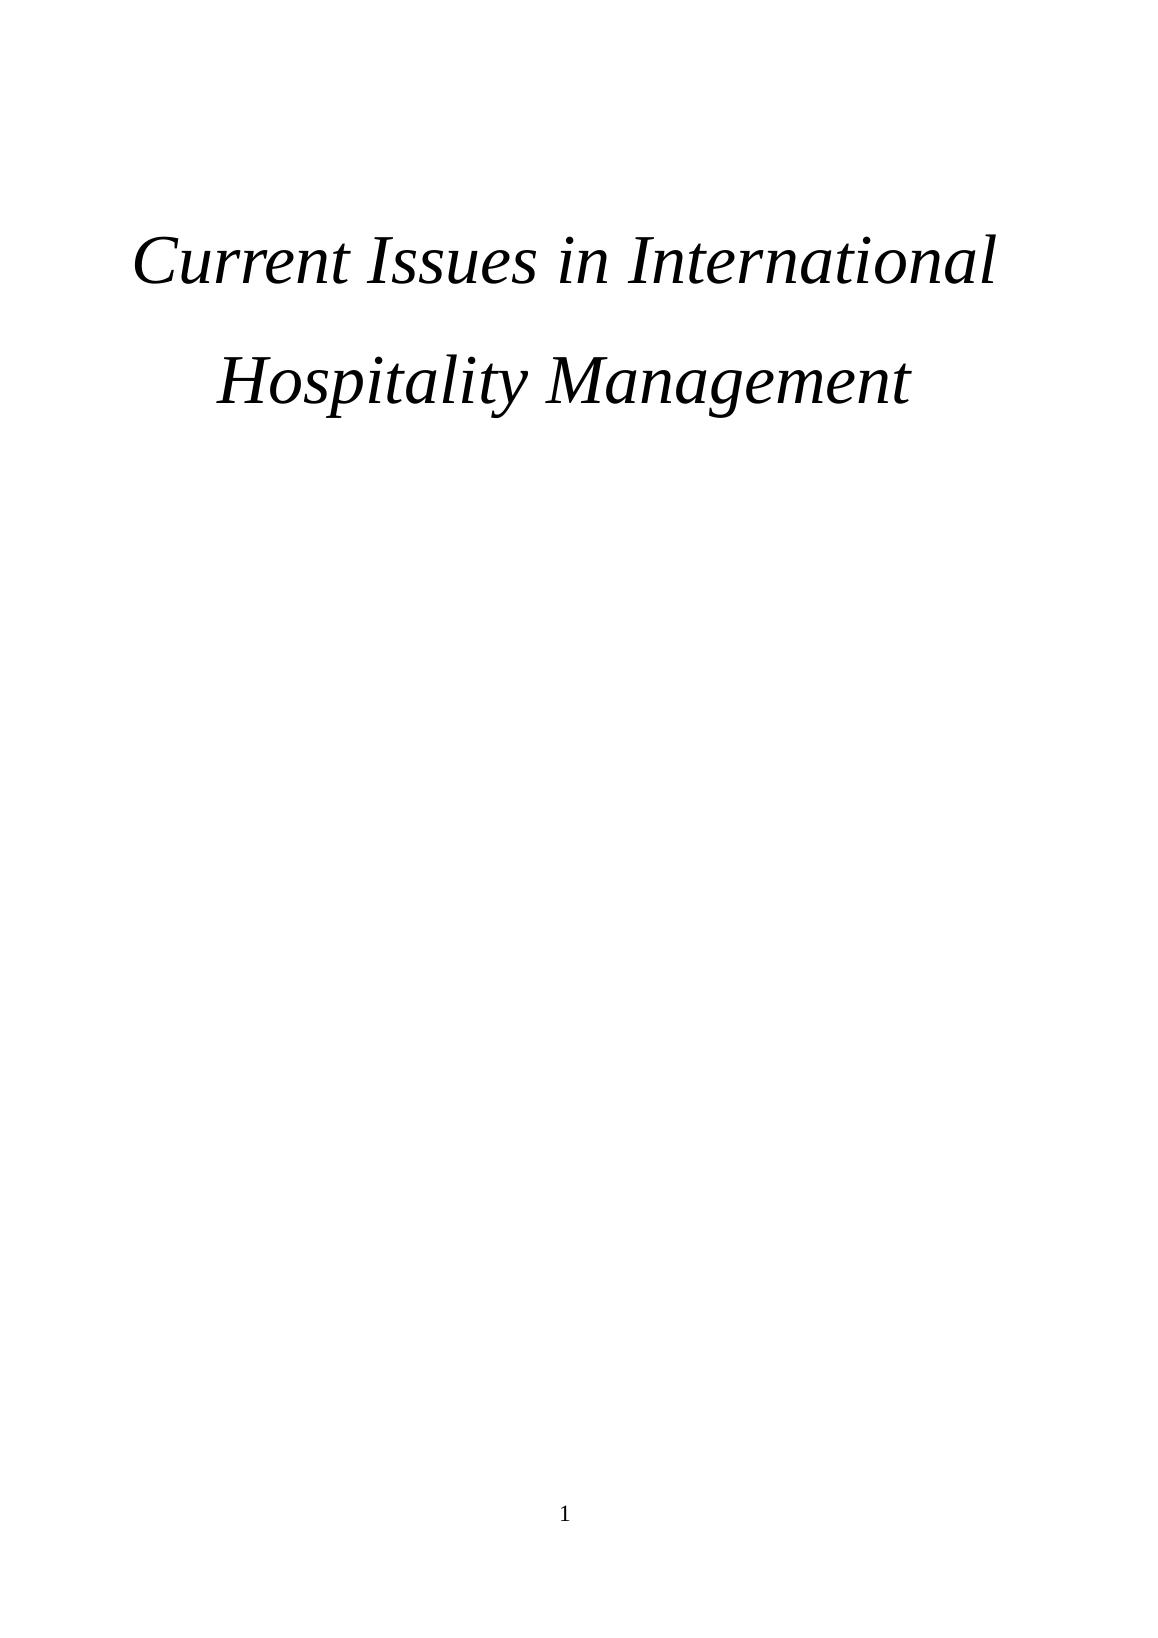 Current Issues in International Hospitality Management  - Assignment_1